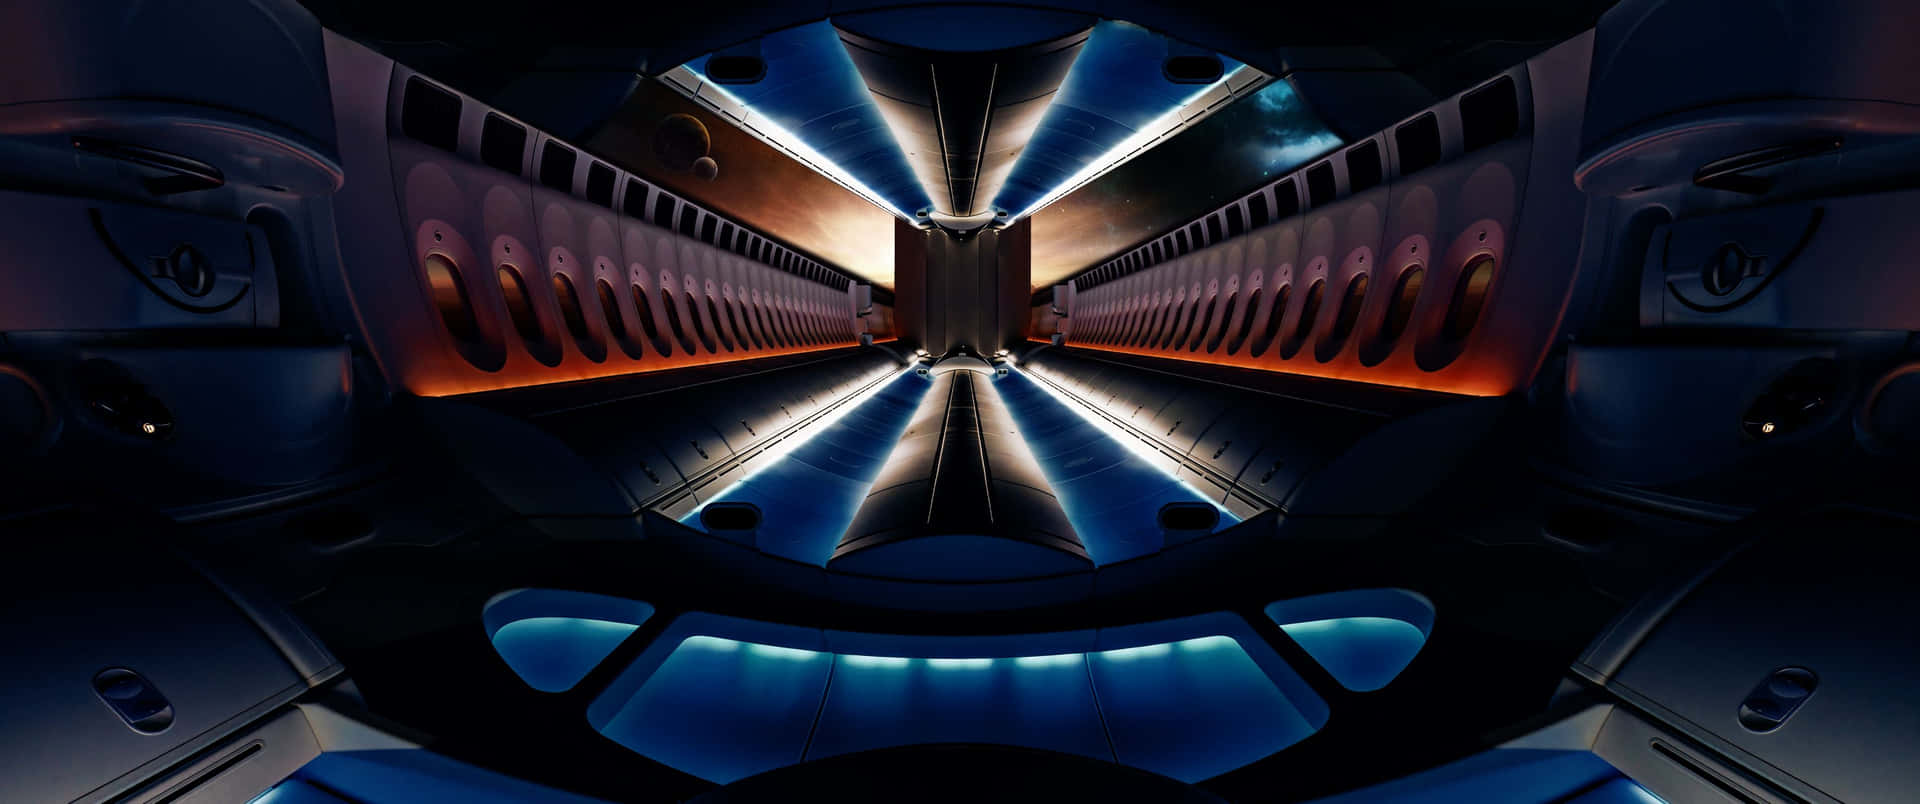 3440x1440 Space Tour Of Space Tunnel Atomium Brussels Wallpaper